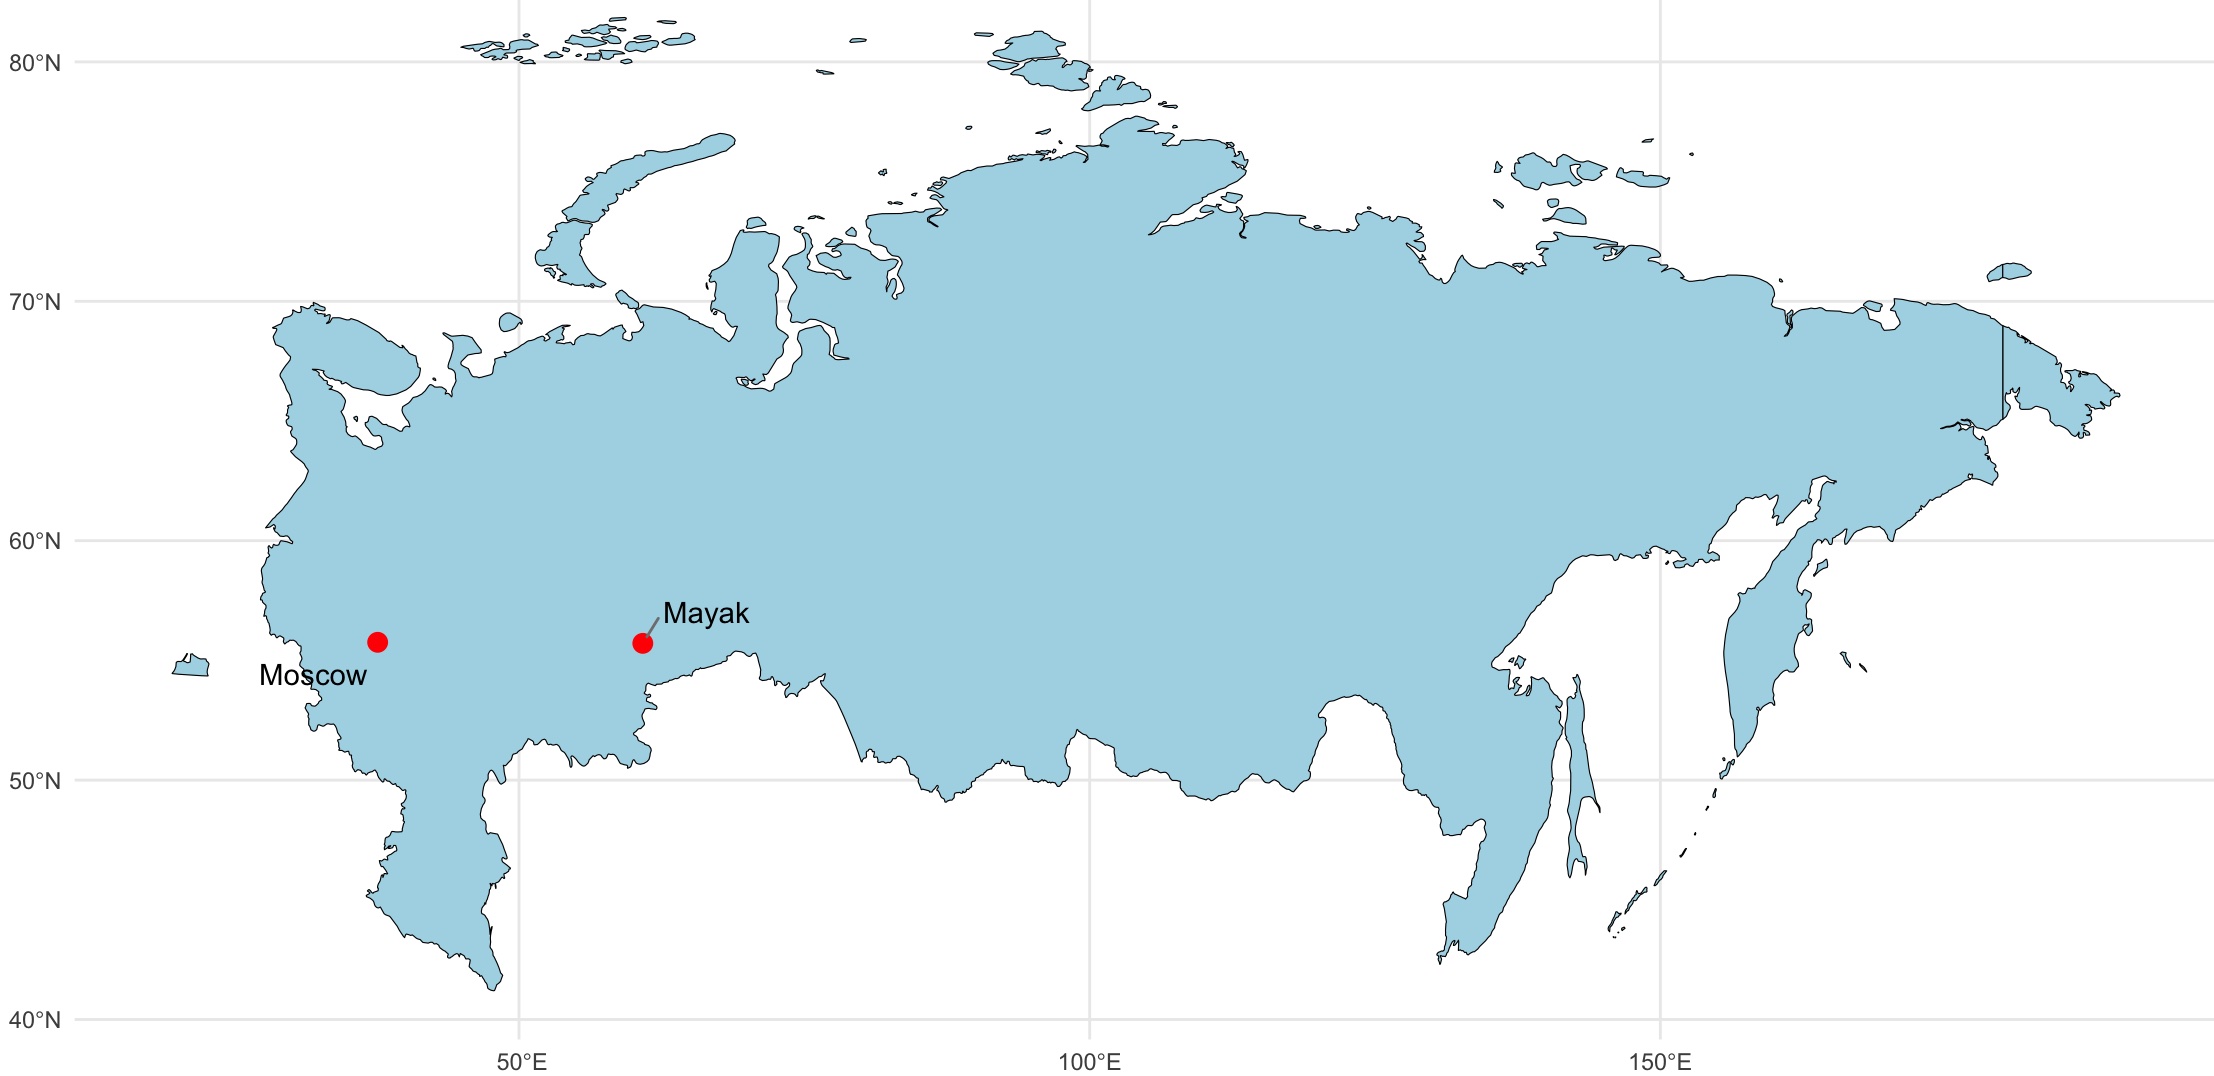 A map showing the location of Russia, specifically highlighting Mayak and Moscow